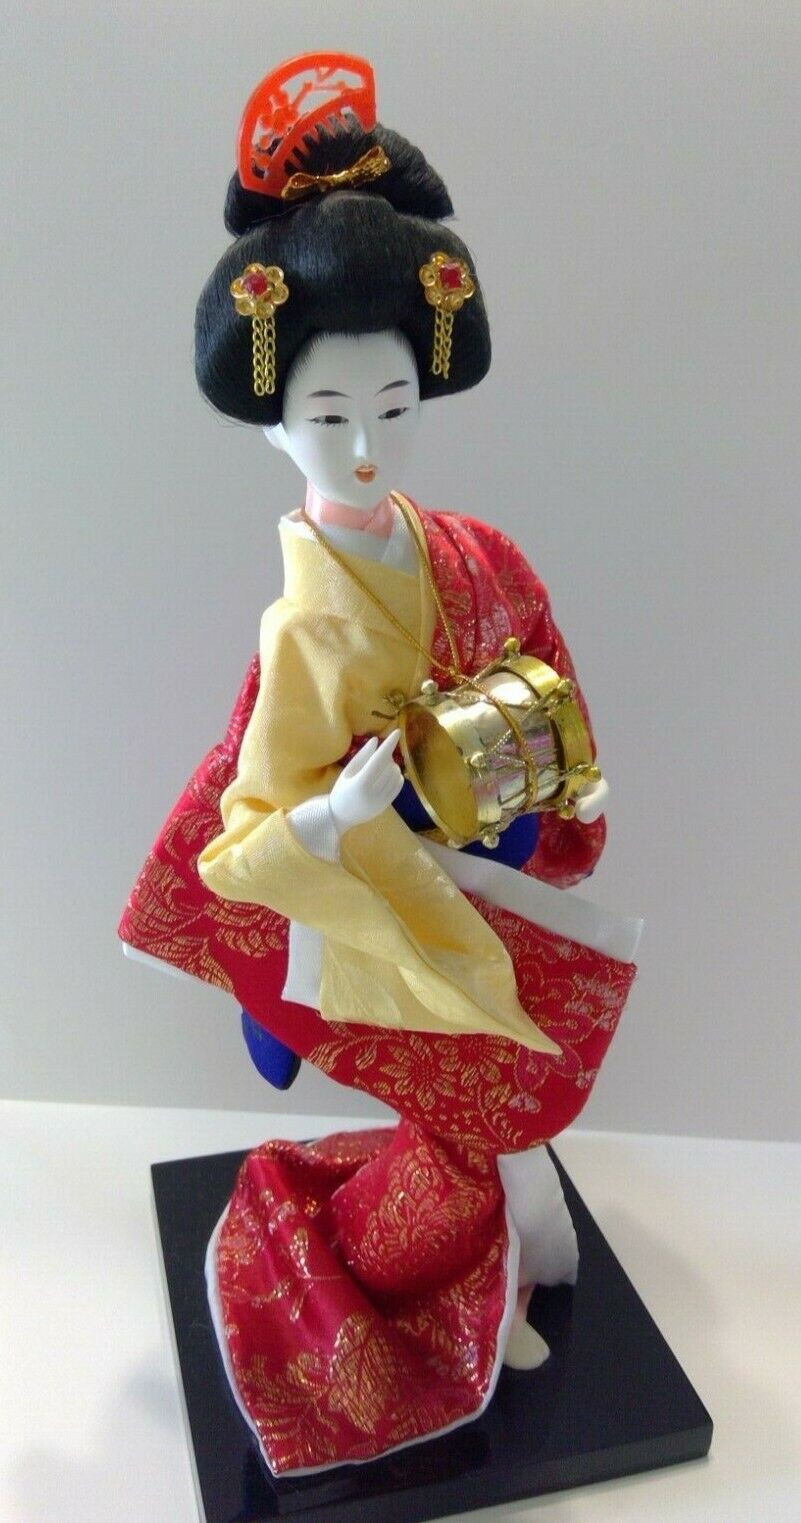 Geisha figure dressed in red, yellow, blue, and gold holding a drum.